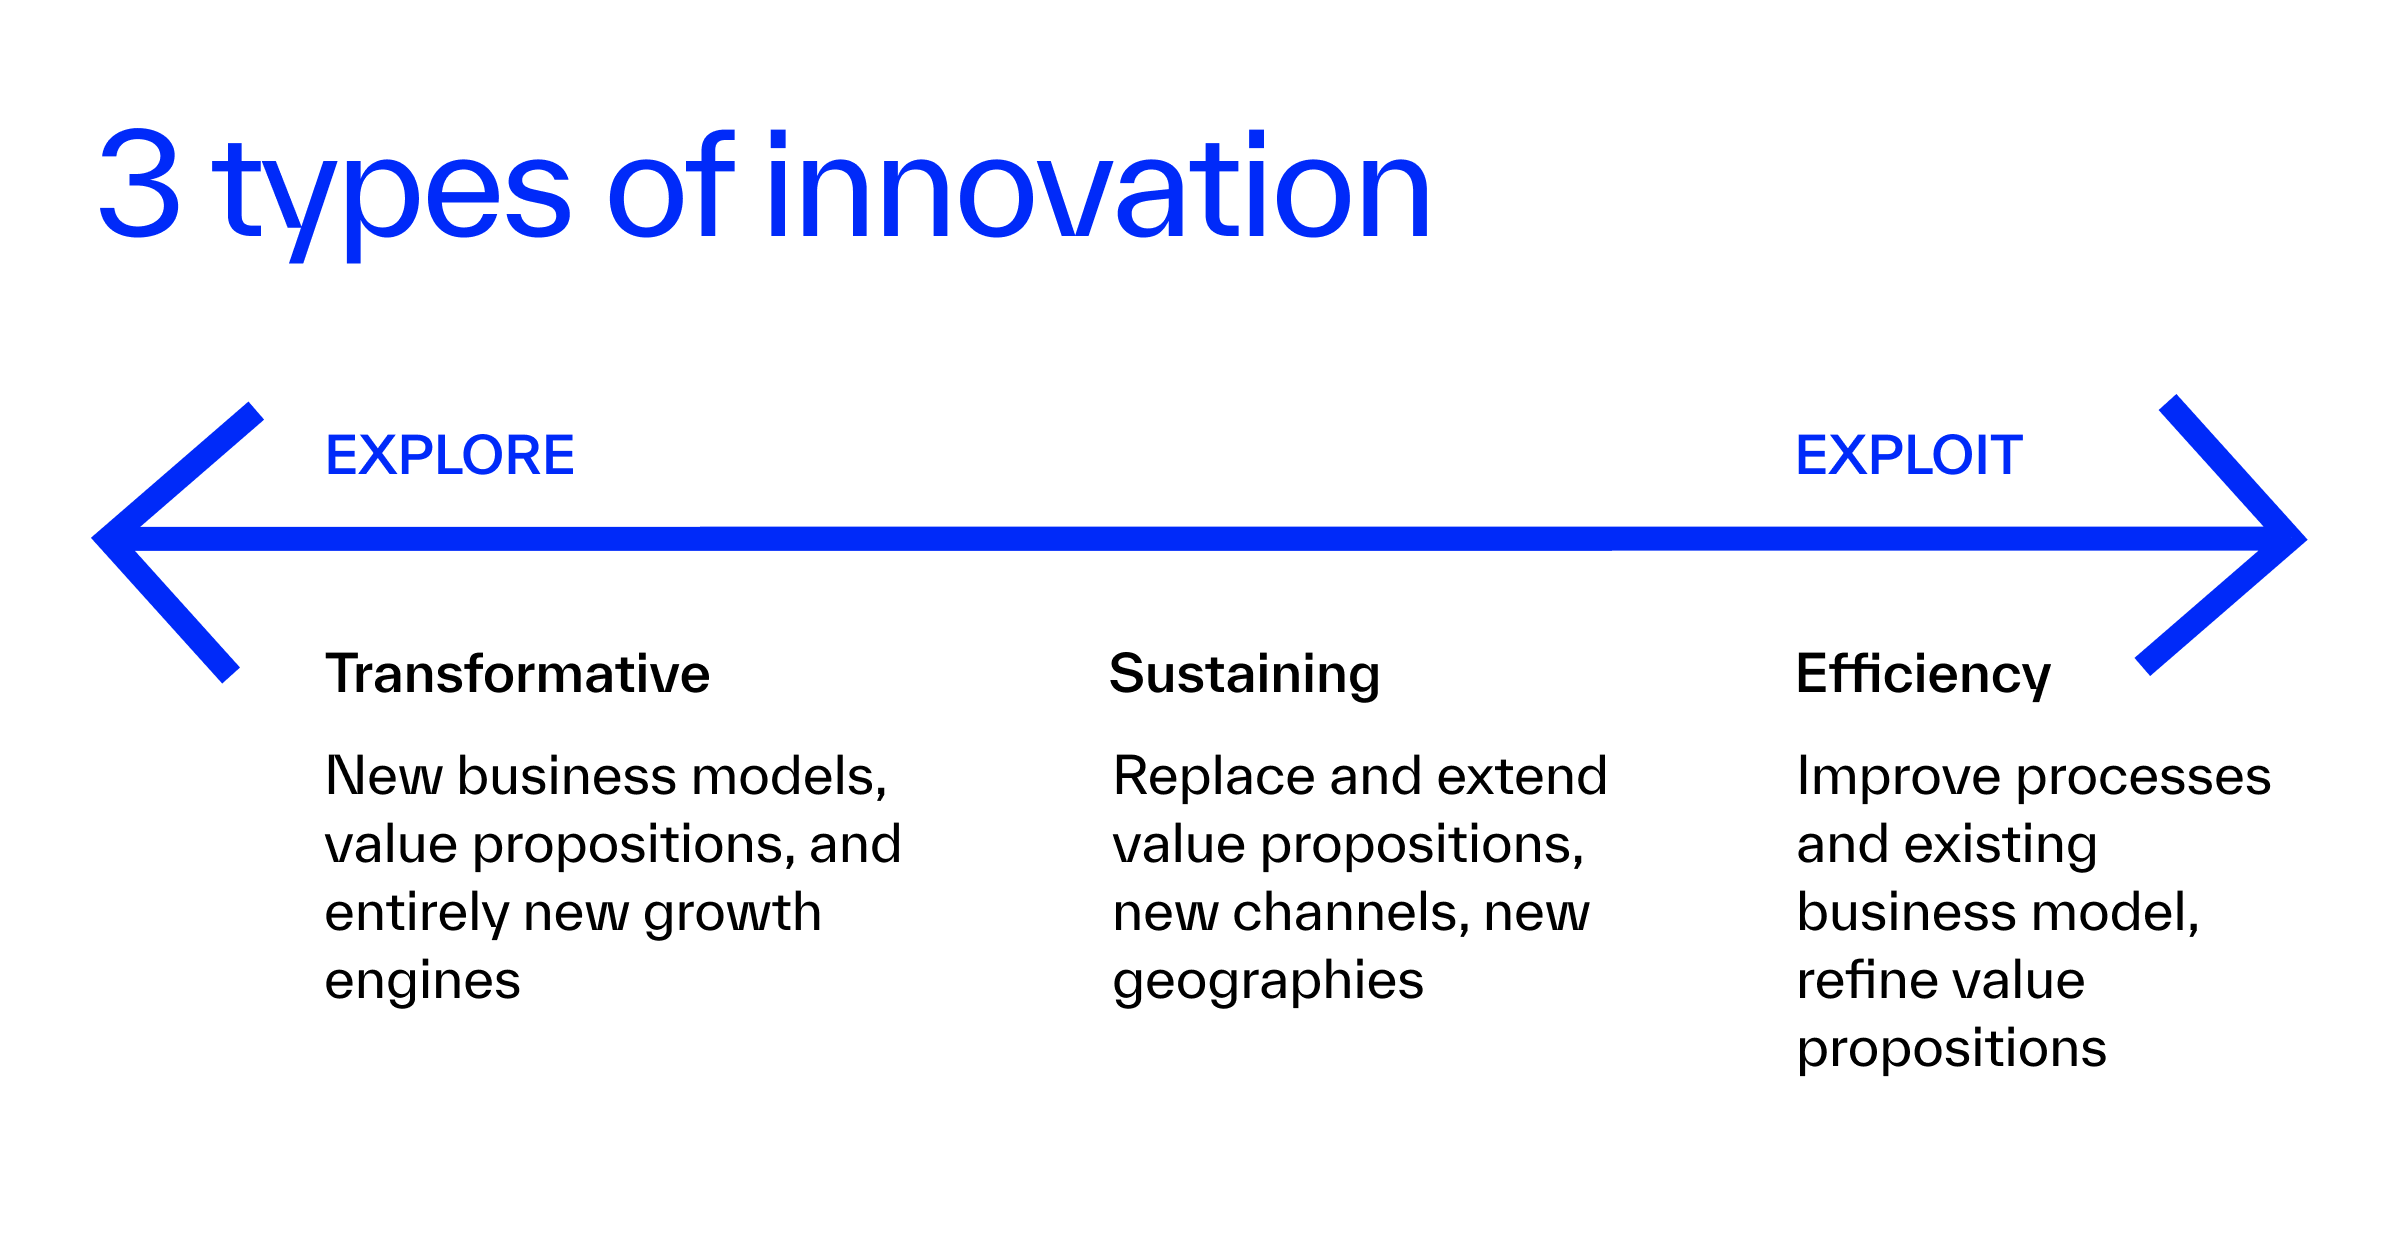 With companies cutting budgets — what should innovators do?